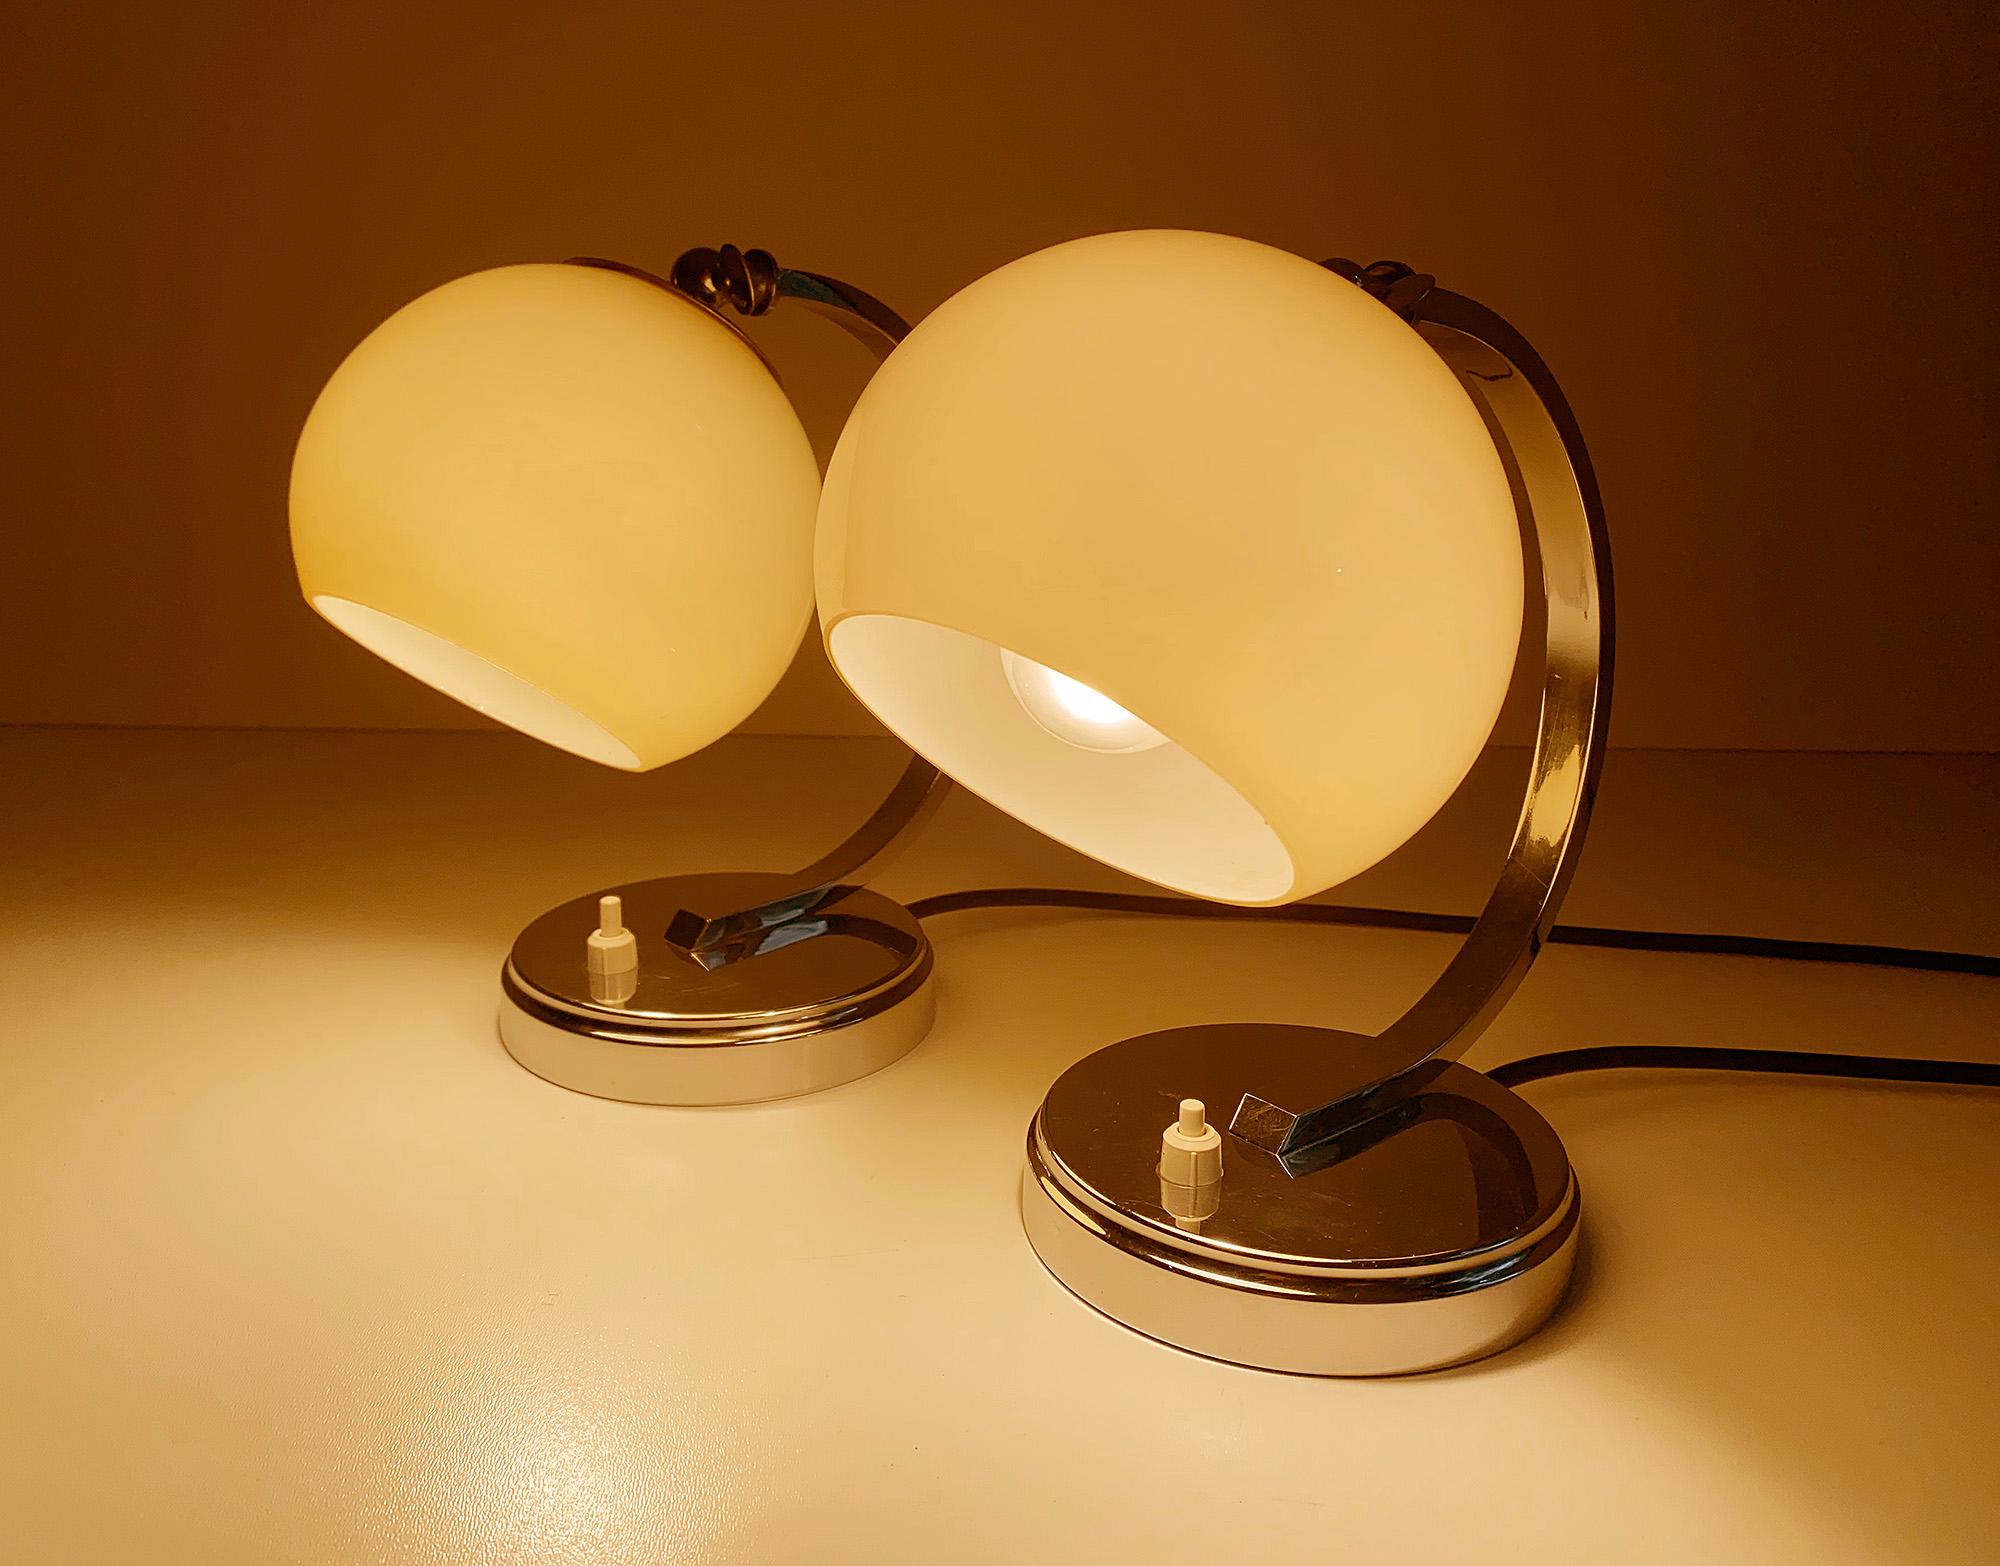 Gorgeous pair of Art Deco table lamps, very high quality design, featuring a round chrome base, half circle craddle with opaline glass shades, the shade’s angle can be adjusted - fully rewired - The lamps have been tested with US American light